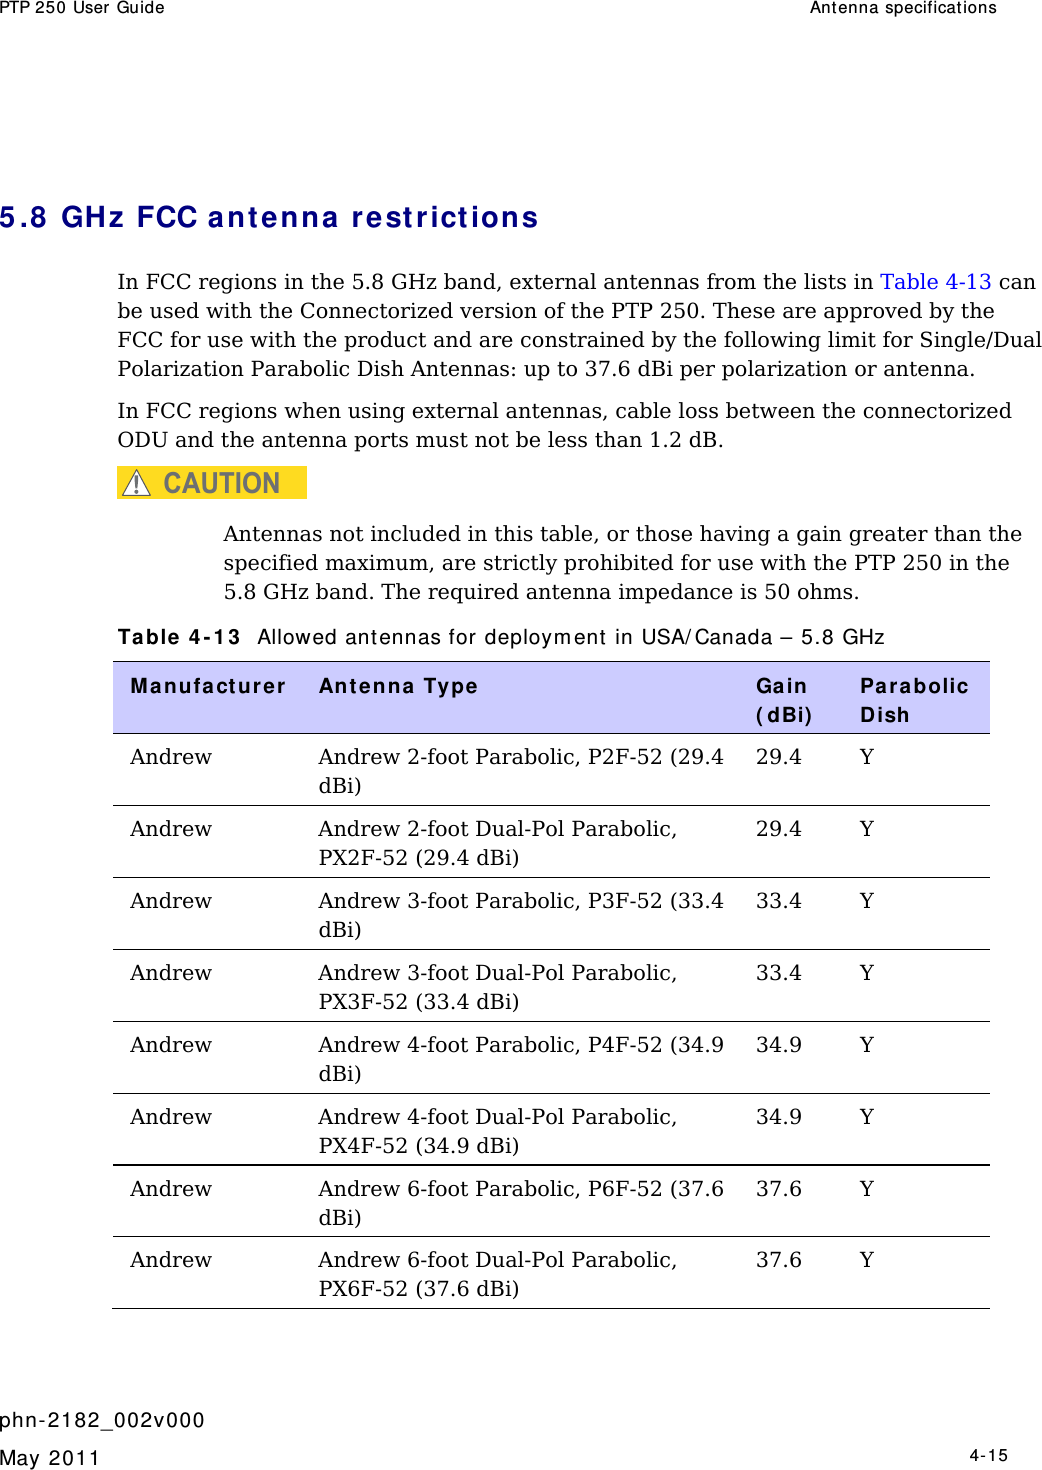 PTP 250 User Guide  Ant enna specificat ions   phn- 2182_002v000   May 2011   4-15   5 .8  GHz FCC ant enna restrictions In FCC regions in the 5.8 GHz band, external antennas from the lists in Table 4-13 can be used with the Connectorized version of the PTP 250. These are approved by the FCC for use with the product and are constrained by the following limit for Single/Dual Polarization Parabolic Dish Antennas: up to 37.6 dBi per polarization or antenna. In FCC regions when using external antennas, cable loss between the connectorized ODU and the antenna ports must not be less than 1.2 dB. CAUTION Antennas not included in this table, or those having a gain greater than the specified maximum, are strictly prohibited for use with the PTP 250 in the 5.8 GHz band. The required antenna impedance is 50 ohms. Table  4 - 1 3   Allowed antennas for deploym ent in USA/ Canada – 5.8 GHz Ma nufa ct ur er   Ant e nna Type  Ga in ( dBi)  Par abolic Dish Andrew  Andrew 2-foot Parabolic, P2F-52 (29.4 dBi) 29.4 Y Andrew Andrew 2-foot Dual-Pol Parabolic, PX2F-52 (29.4 dBi) 29.4 Y Andrew  Andrew 3-foot Parabolic, P3F-52 (33.4 dBi) 33.4 Y Andrew Andrew 3-foot Dual-Pol Parabolic, PX3F-52 (33.4 dBi) 33.4 Y Andrew  Andrew 4-foot Parabolic, P4F-52 (34.9 dBi) 34.9 Y Andrew Andrew 4-foot Dual-Pol Parabolic, PX4F-52 (34.9 dBi) 34.9 Y Andrew  Andrew 6-foot Parabolic, P6F-52 (37.6 dBi) 37.6 Y Andrew Andrew 6-foot Dual-Pol Parabolic, PX6F-52 (37.6 dBi) 37.6 Y 